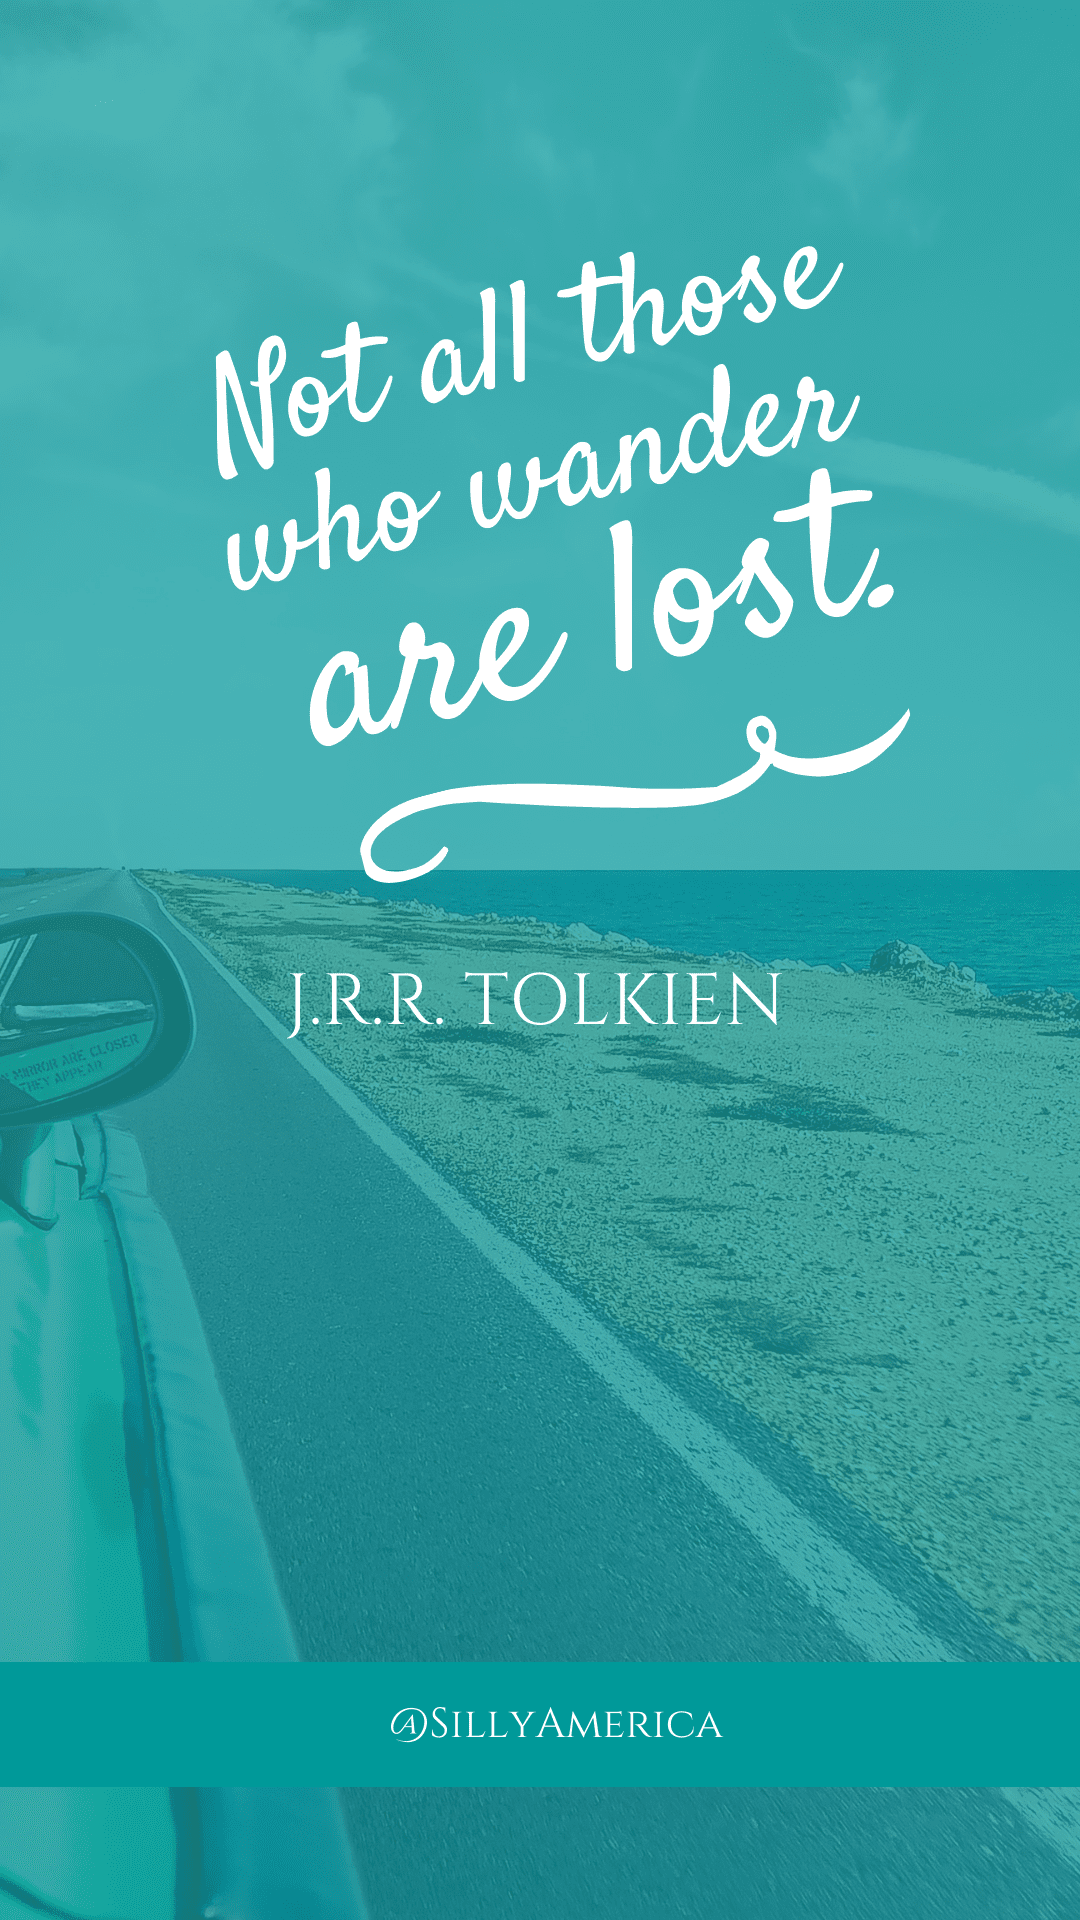 “Not all those who wander are lost.” J.R.R. Tolkien, The Fellowship of the Ring